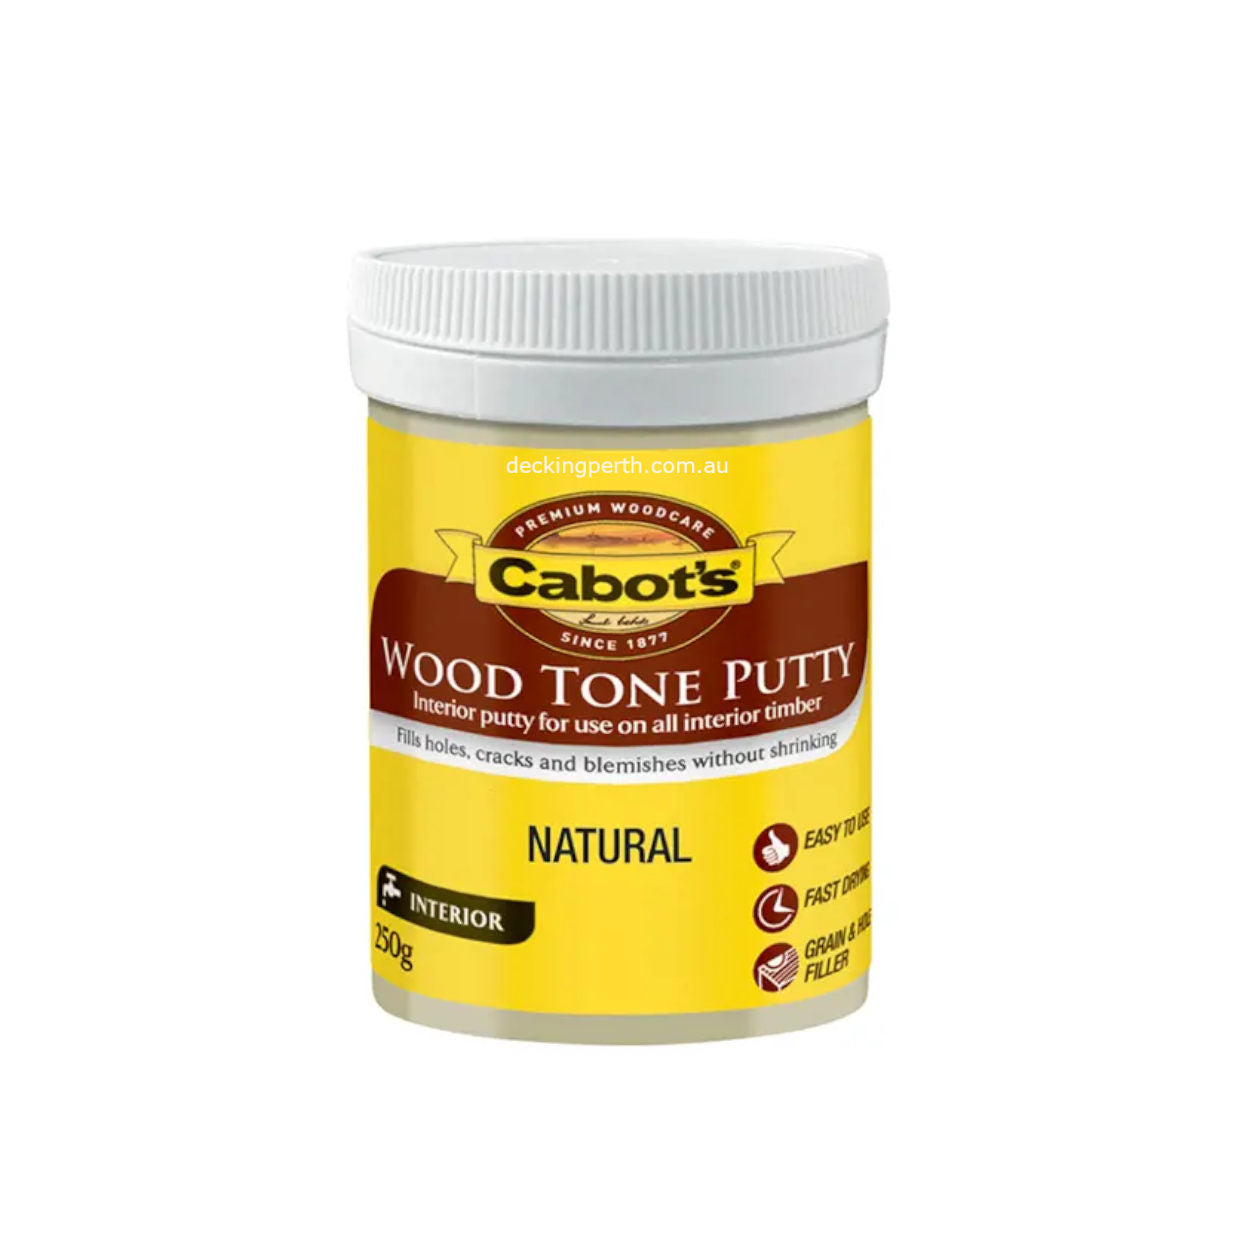 CABOTS_Woodtone_Putty_Natural_250g_Decking_Perth